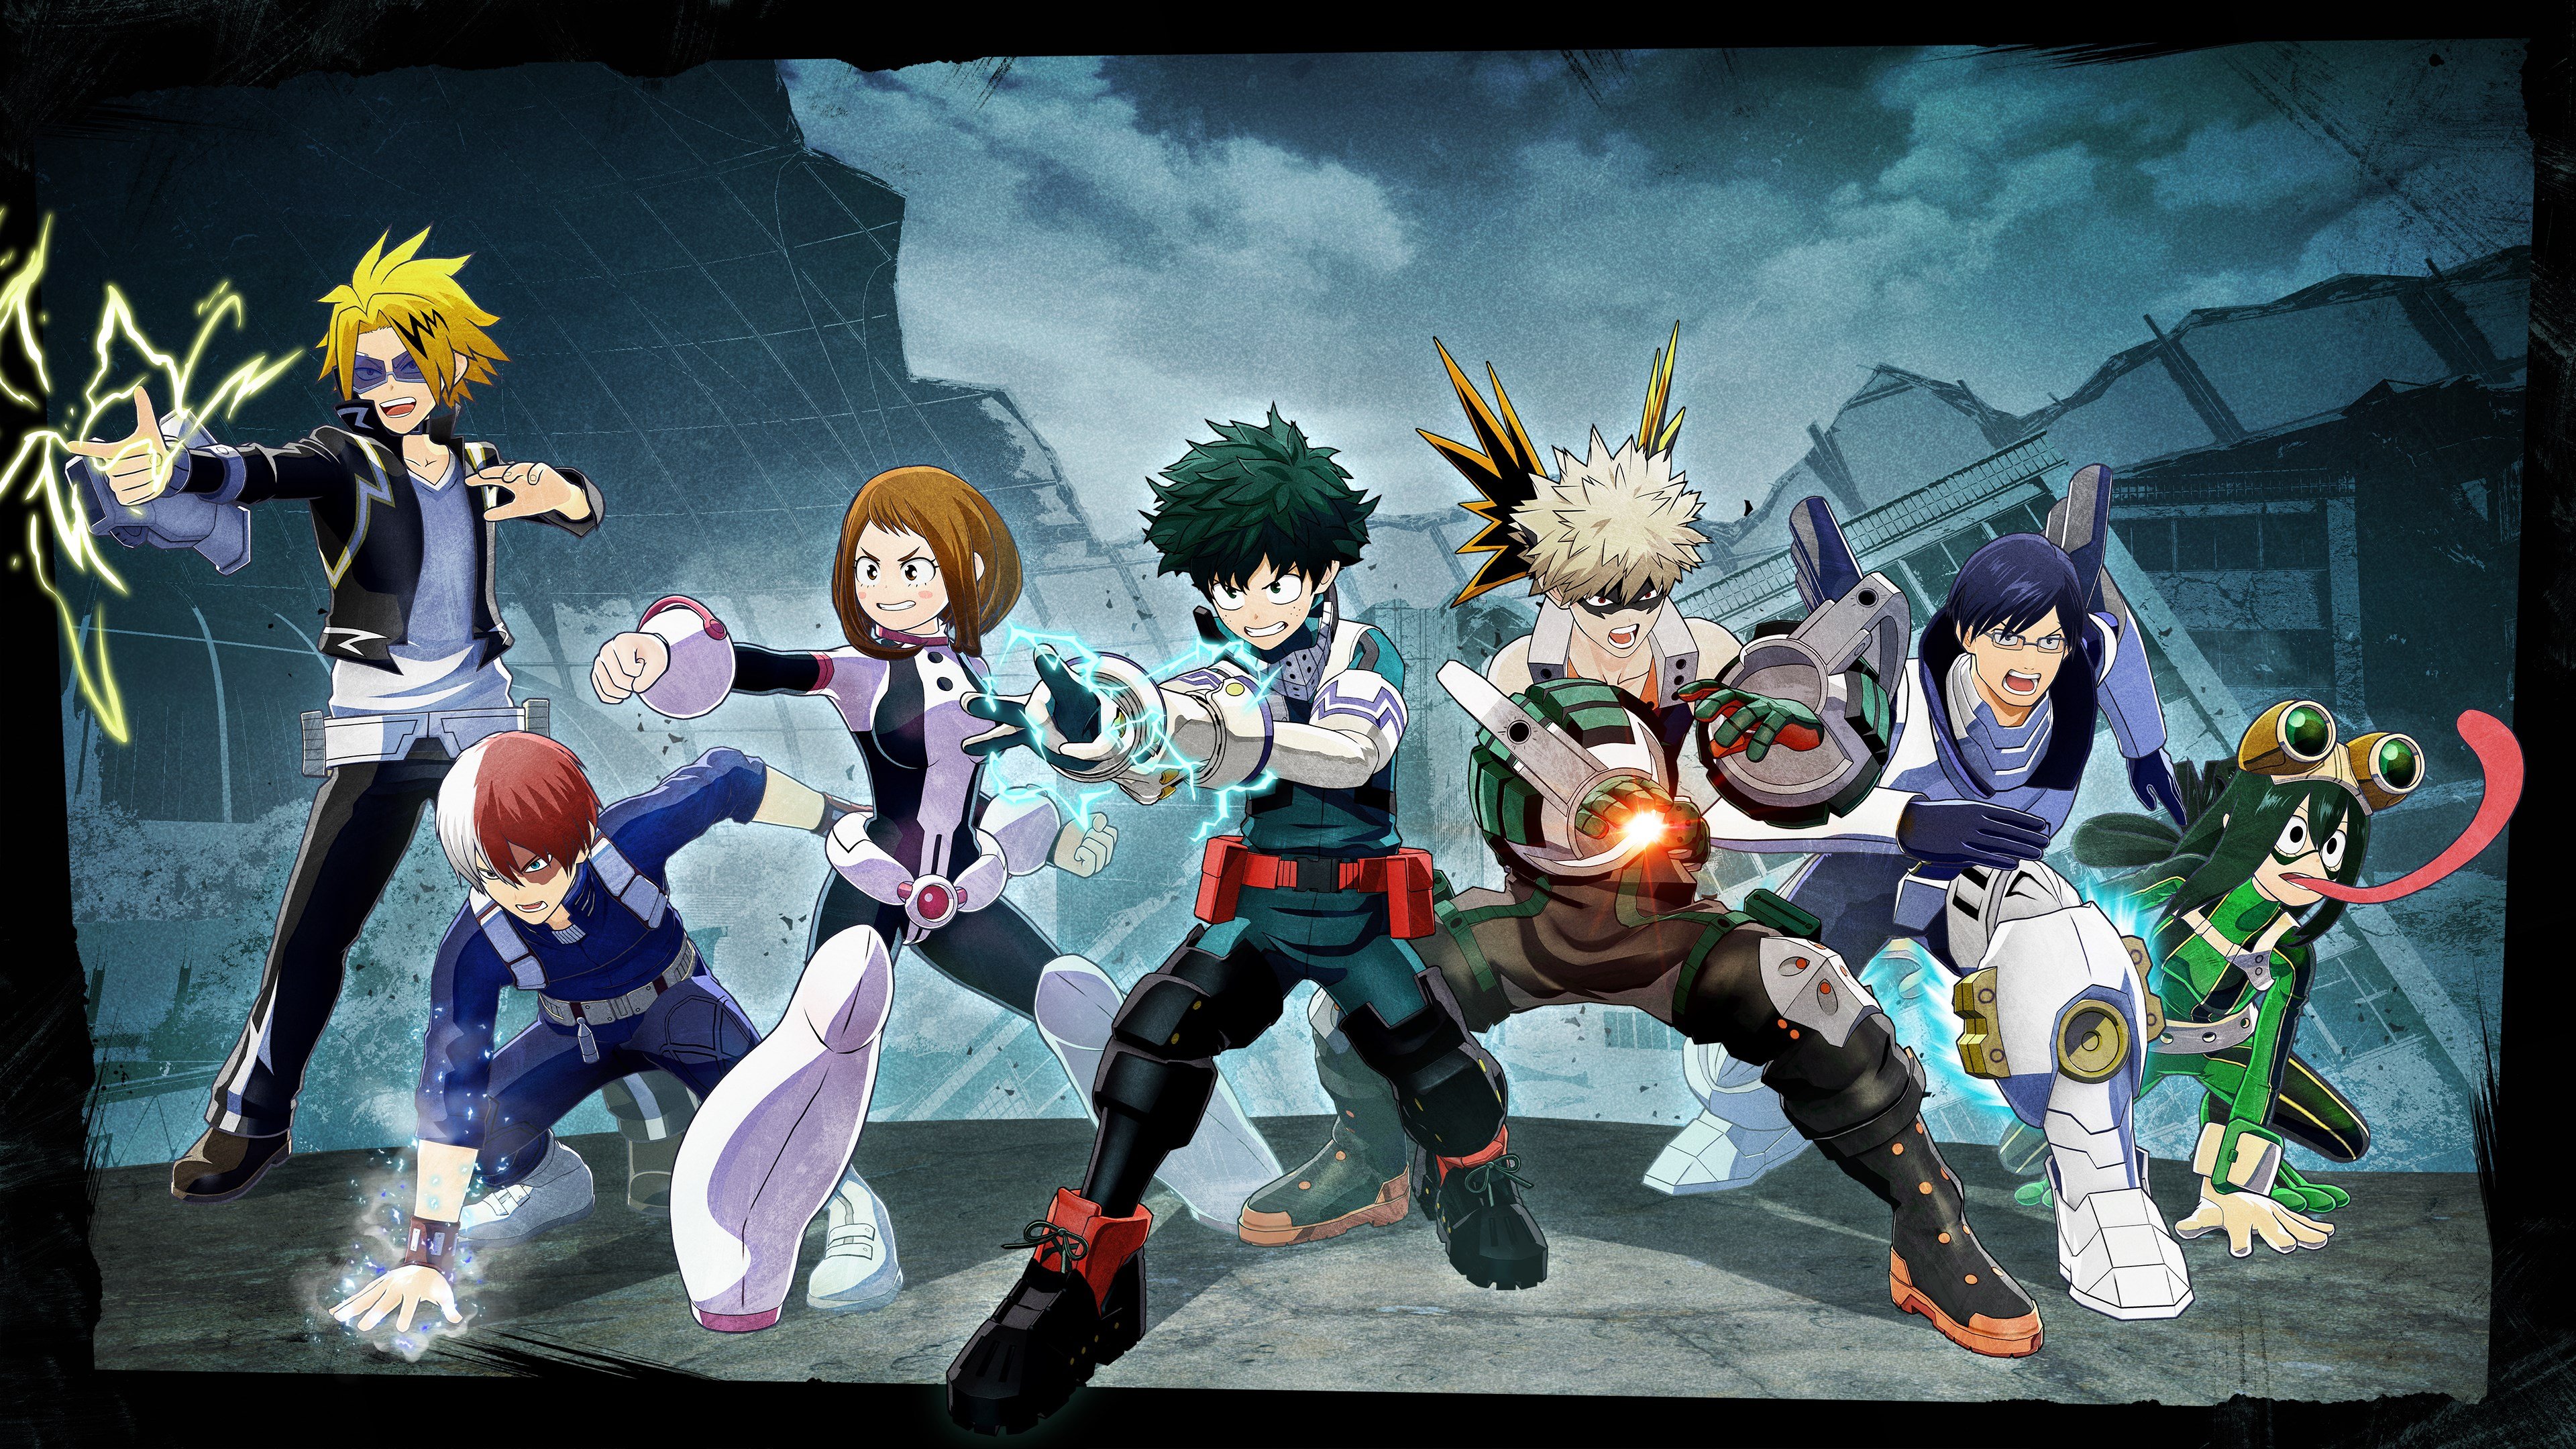 New My Hero Academia Battle Royale Console Game! Ultra Rumble! SJ Scans 